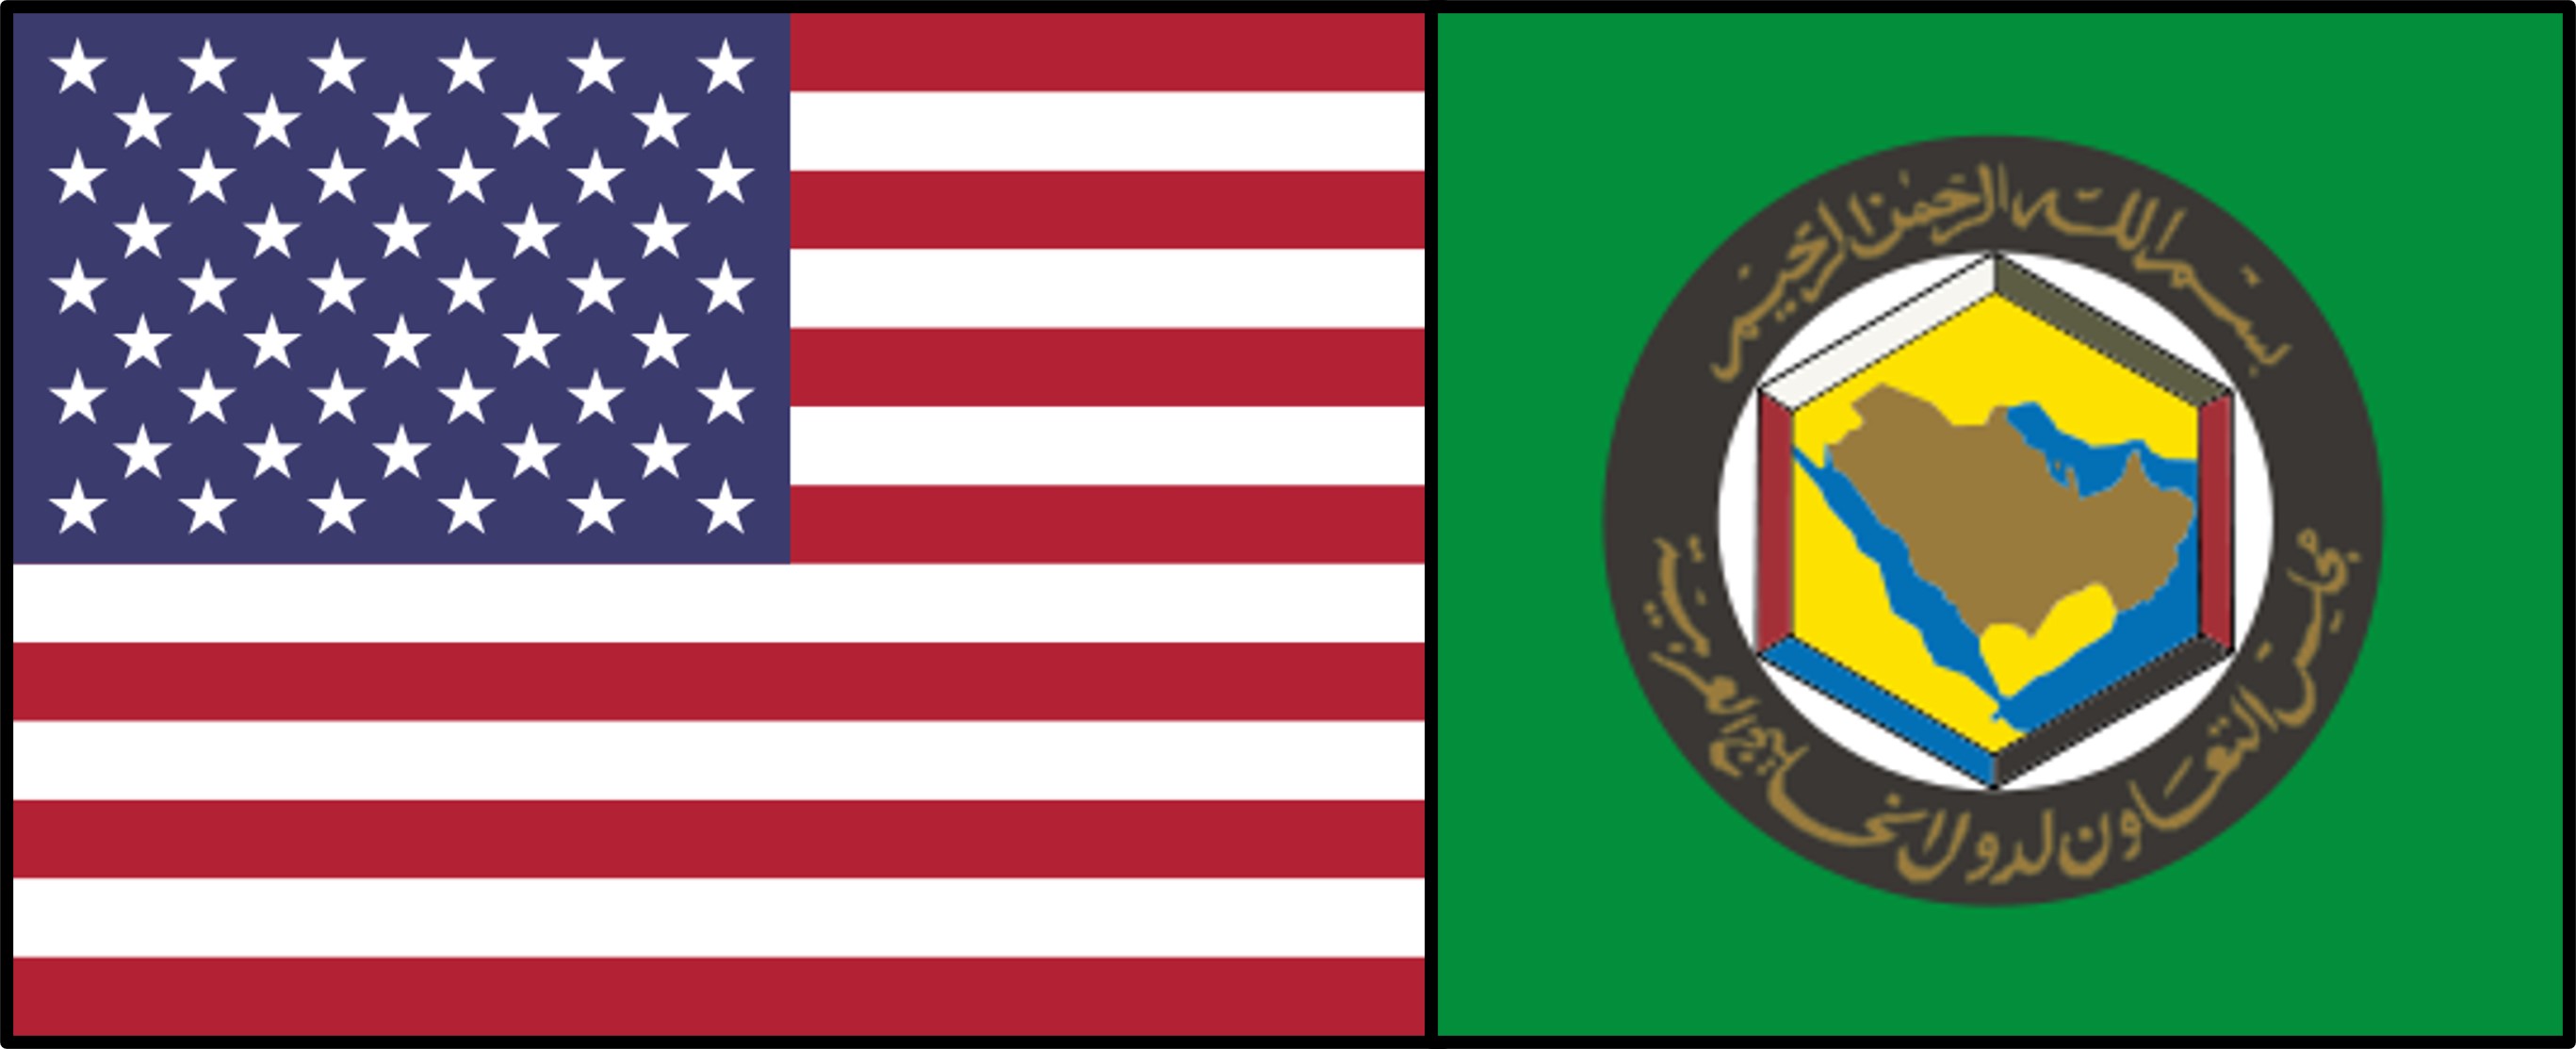 U.S. and GCC Flags